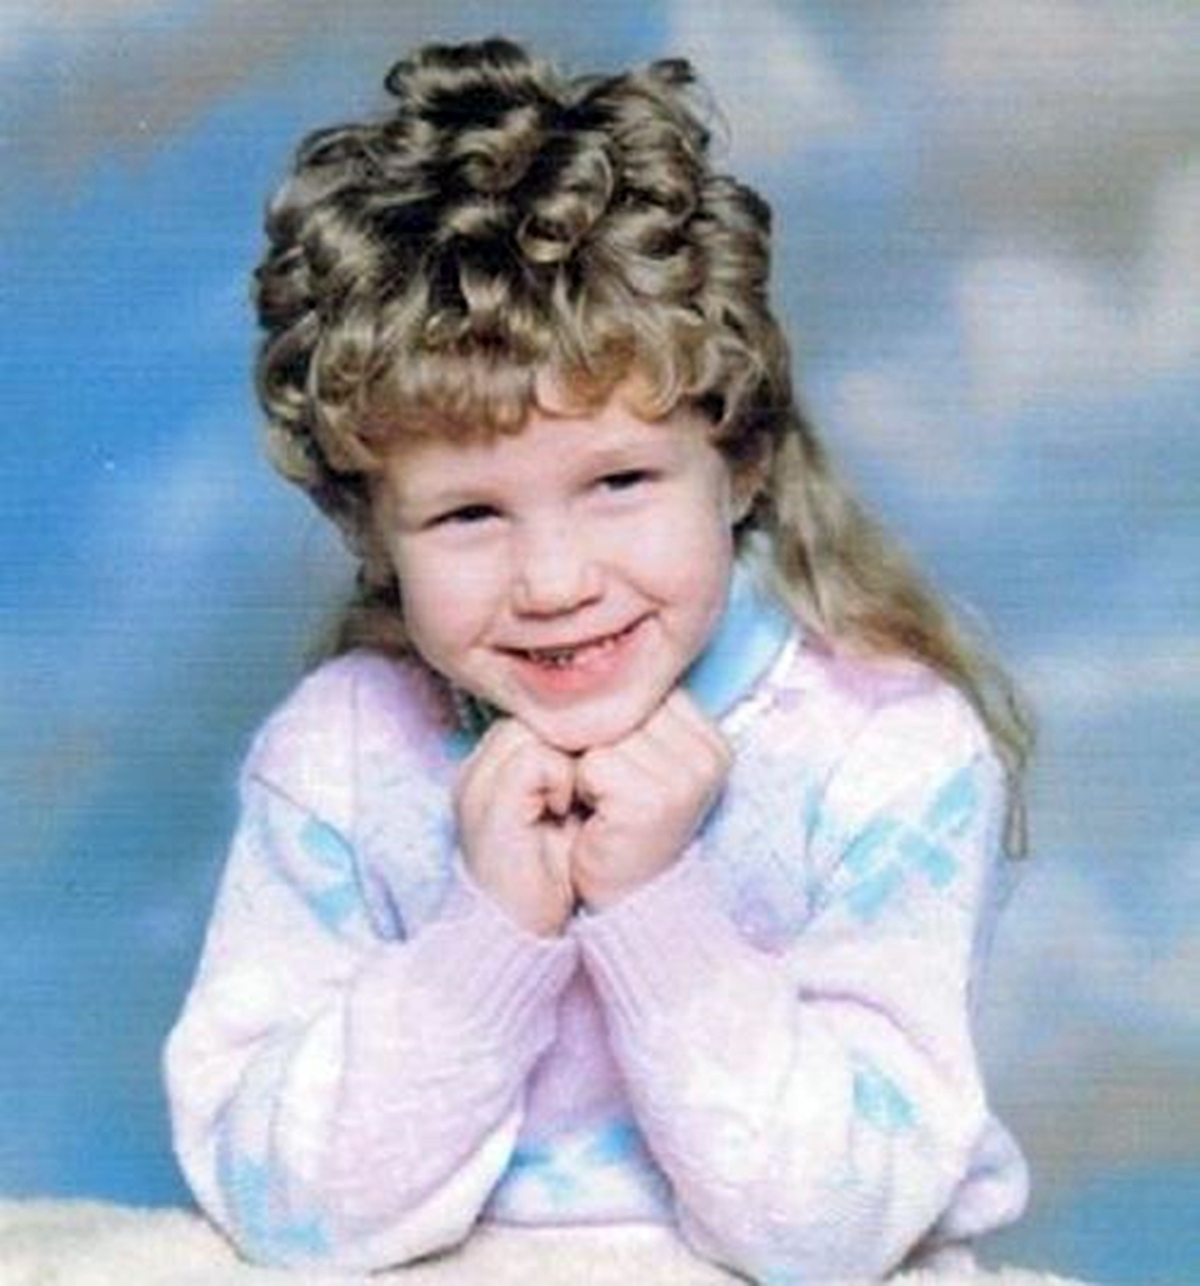 20 Cringeworthy 80s Kids Hairstyles That Have To Be Seen To Be Believed